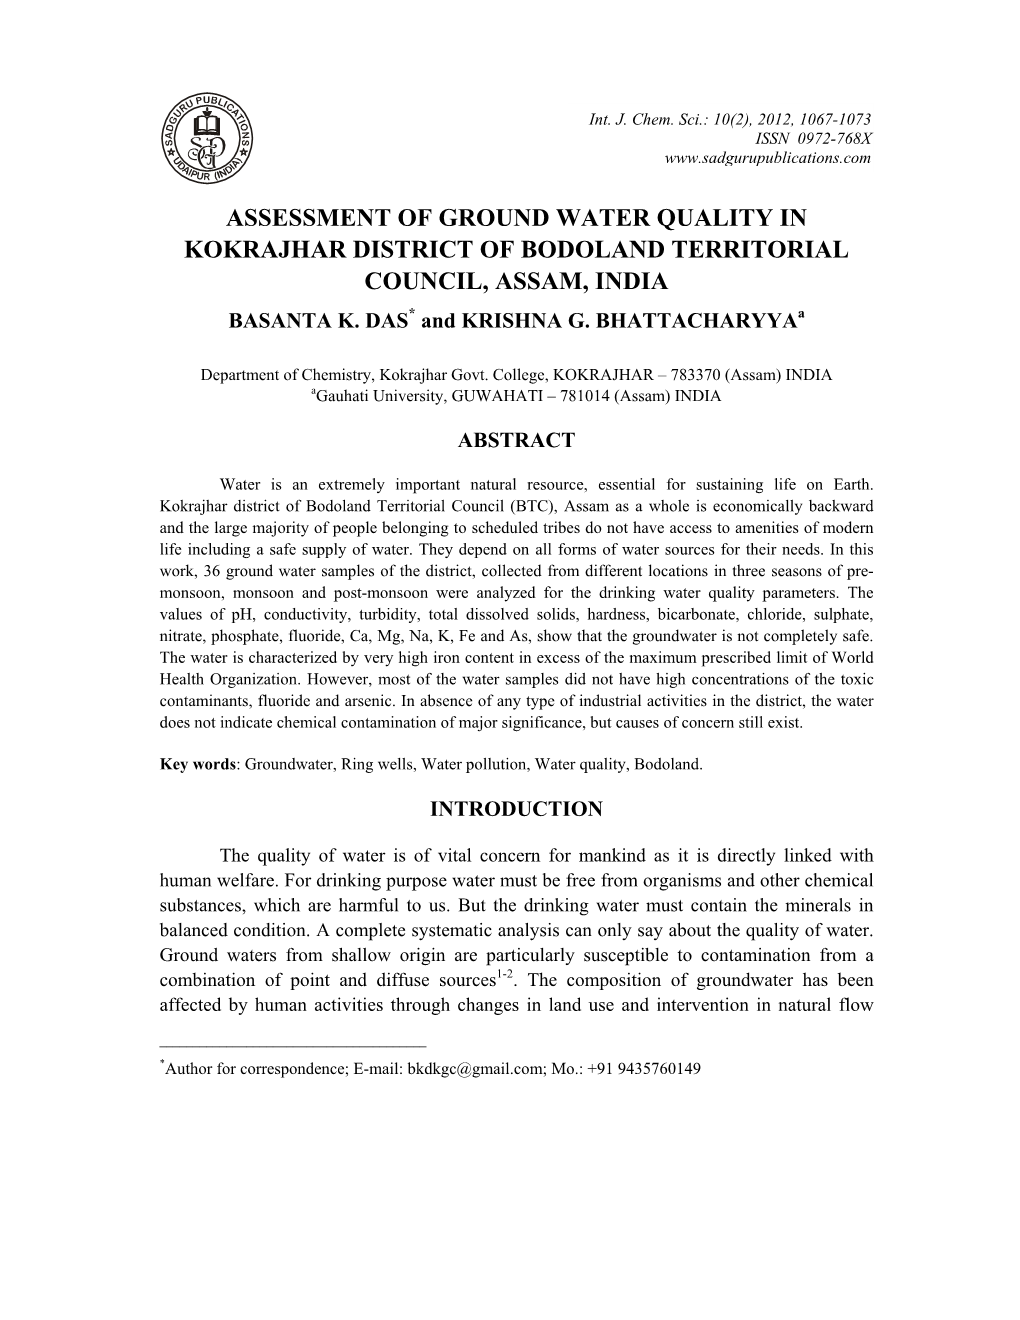 Assessment of Ground Water Quality in Kokrajhar District of Bodoland Territorial Council, Assam, India Basanta K